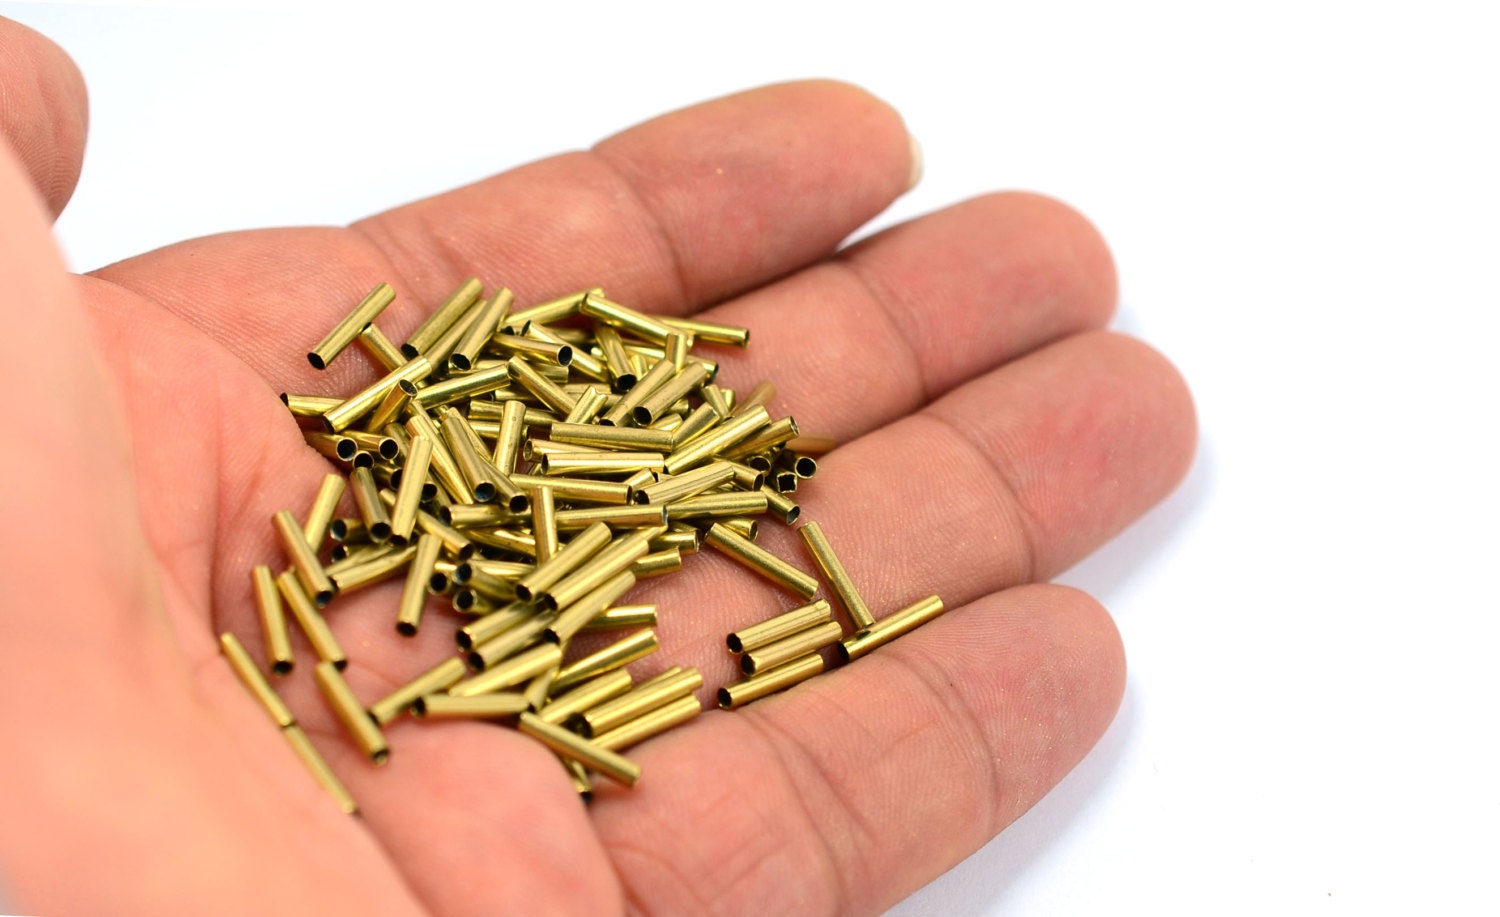 Brass Spacers Price Starting From Rs 2/Pc. Find Verified Sellers